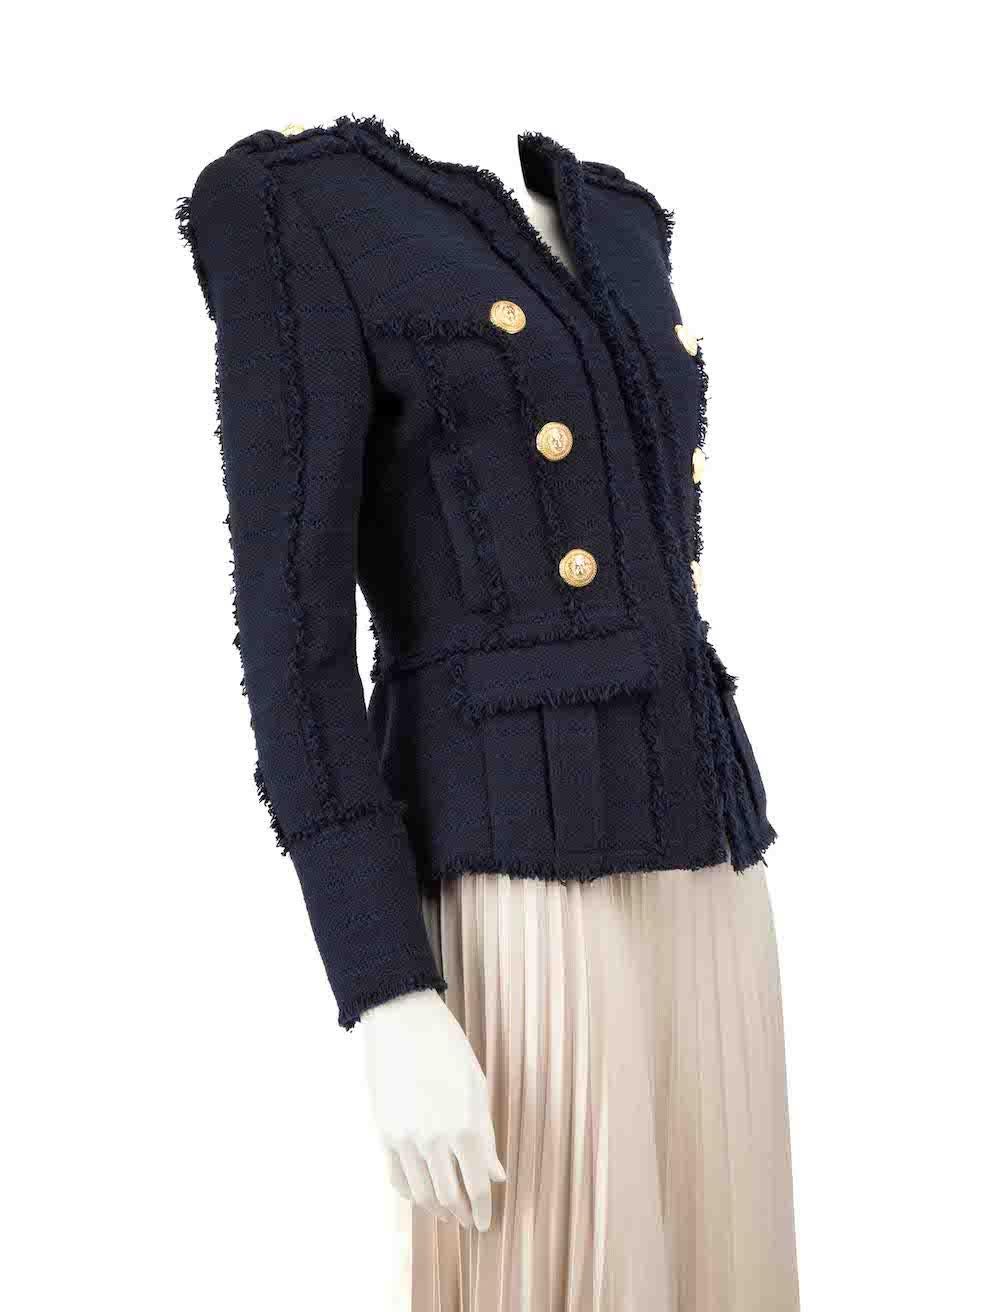 CONDITION is Very good. Hardly any visible wear to jacket is evident on this used Balmain designer resale item.
 
 
 
 Details
 
 
 Navy
 
 Synthetic
 
 Fitted jacket
 
 Mid length
 
 Gold tone logo buttons
 
 Logo snap buttoned cuffs
 
 Hook and